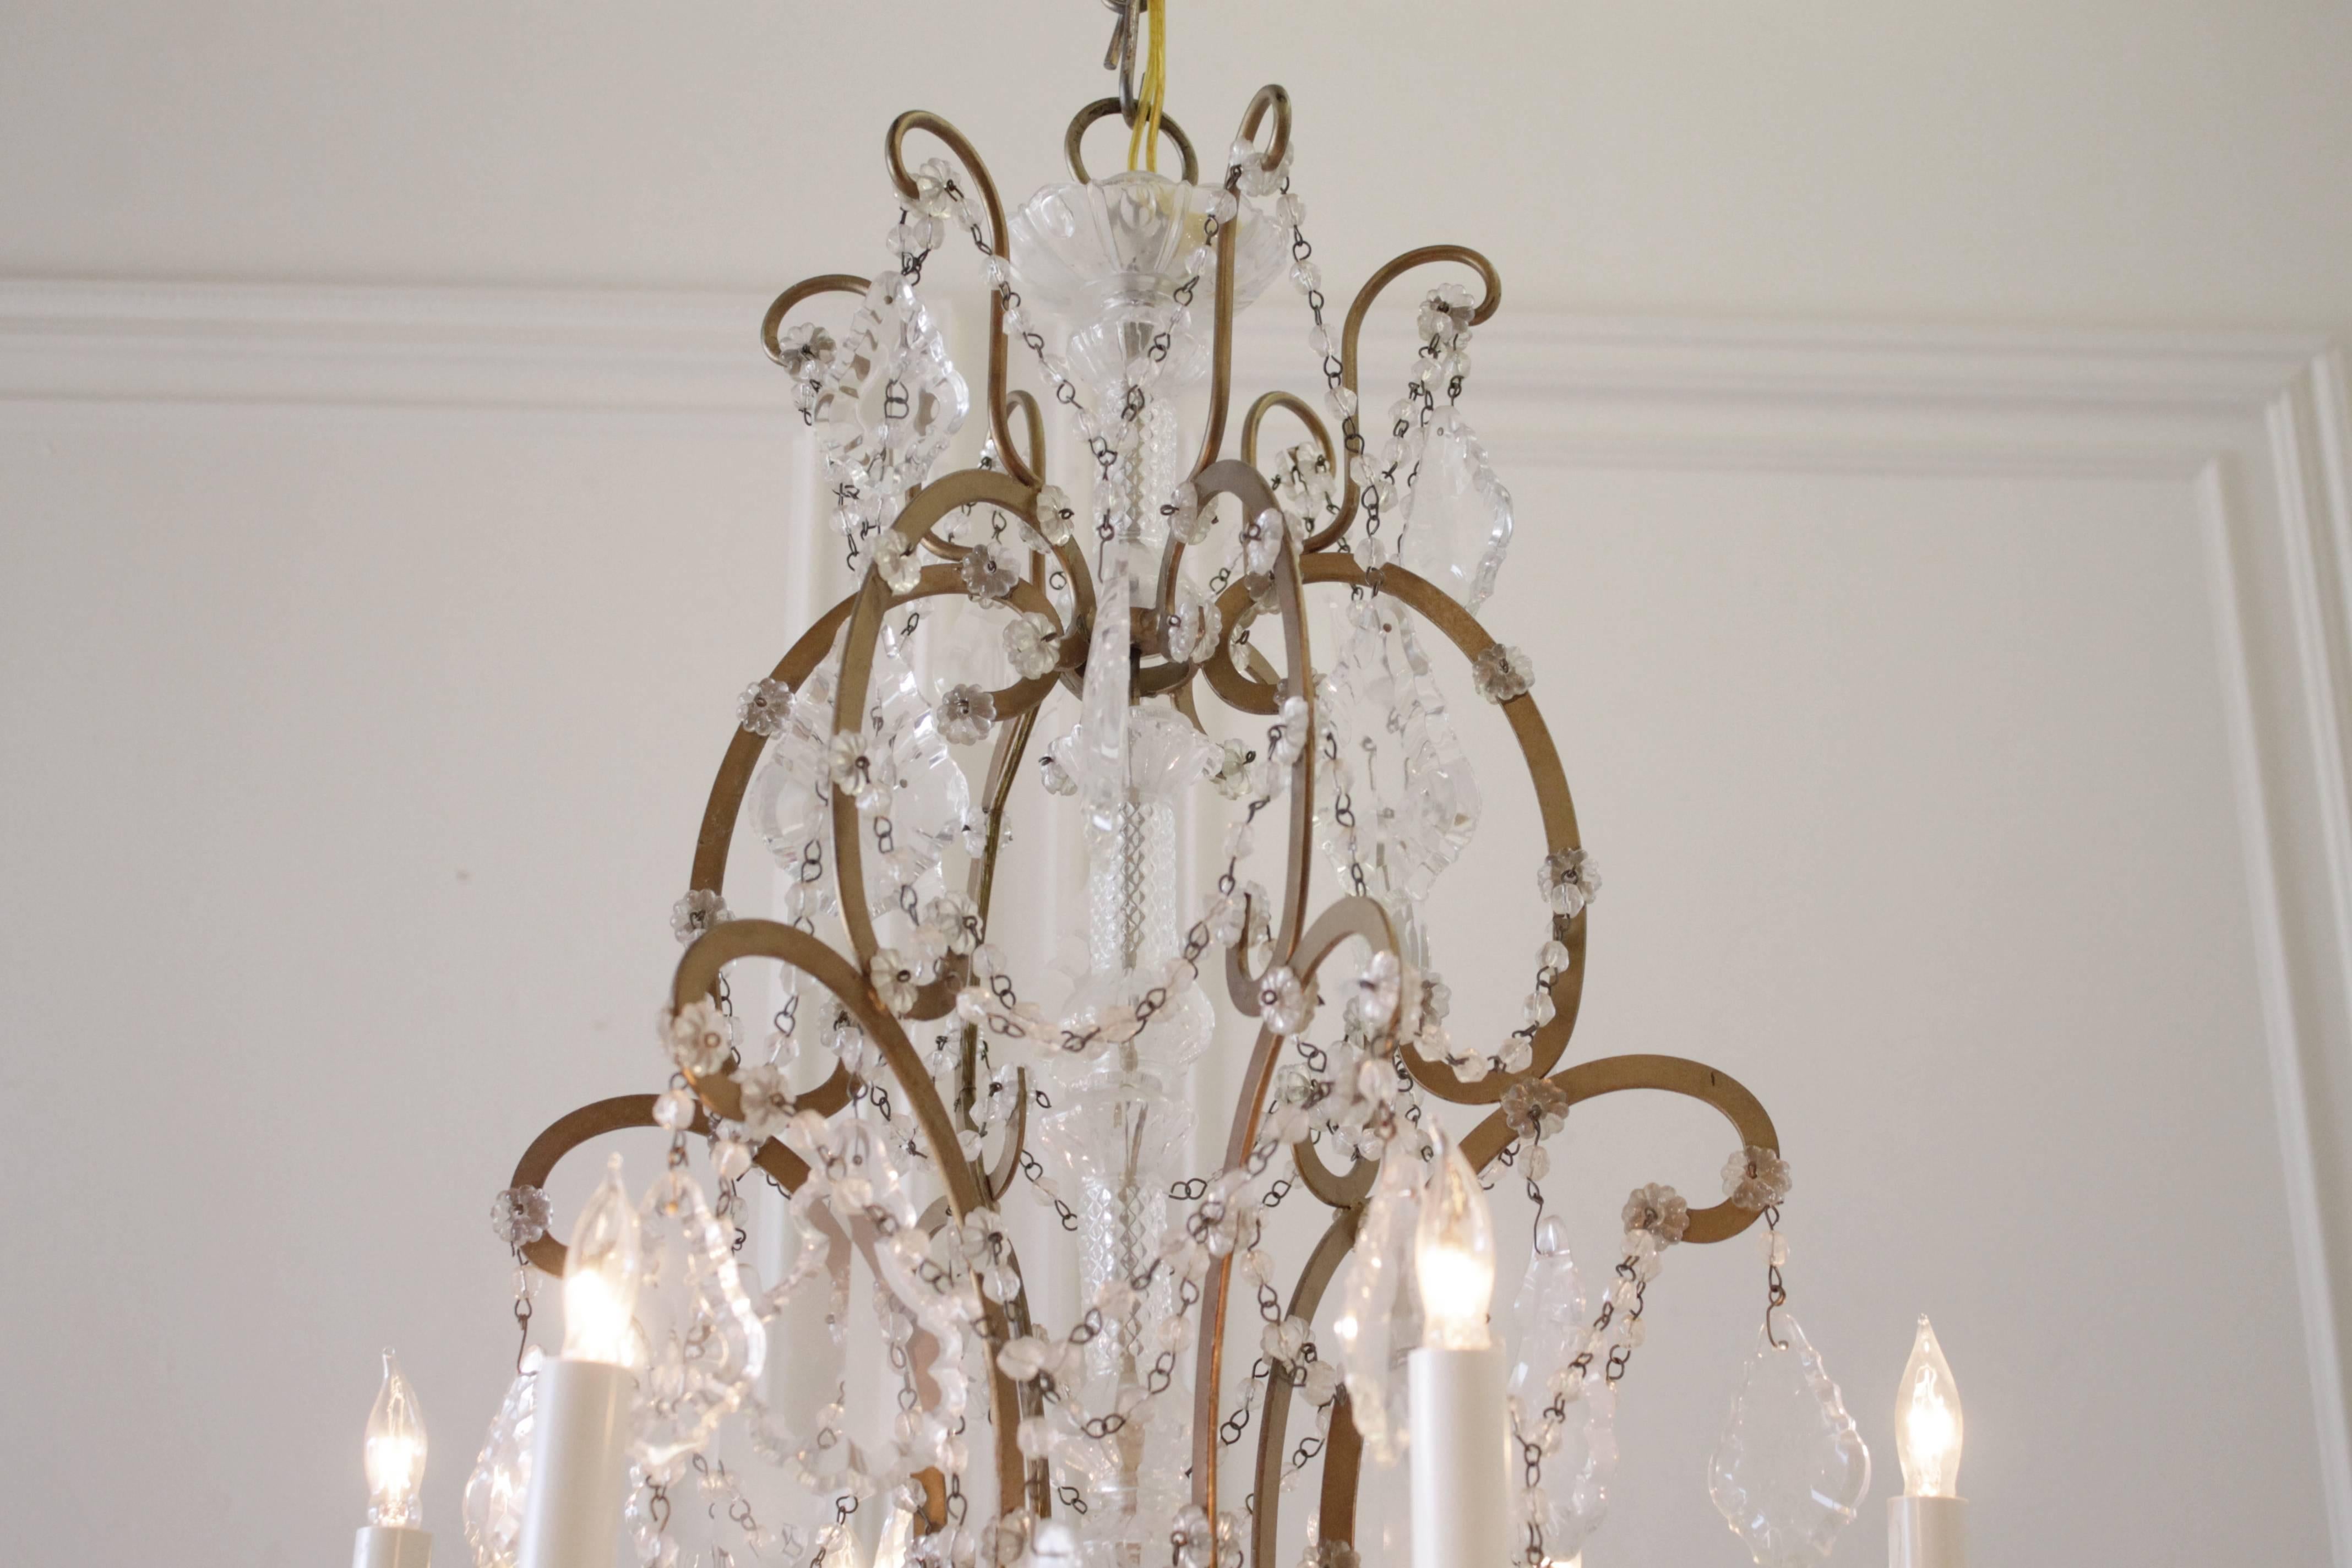 French Antique Italian Eighteen-Light Bronze and Crystal Chandelier